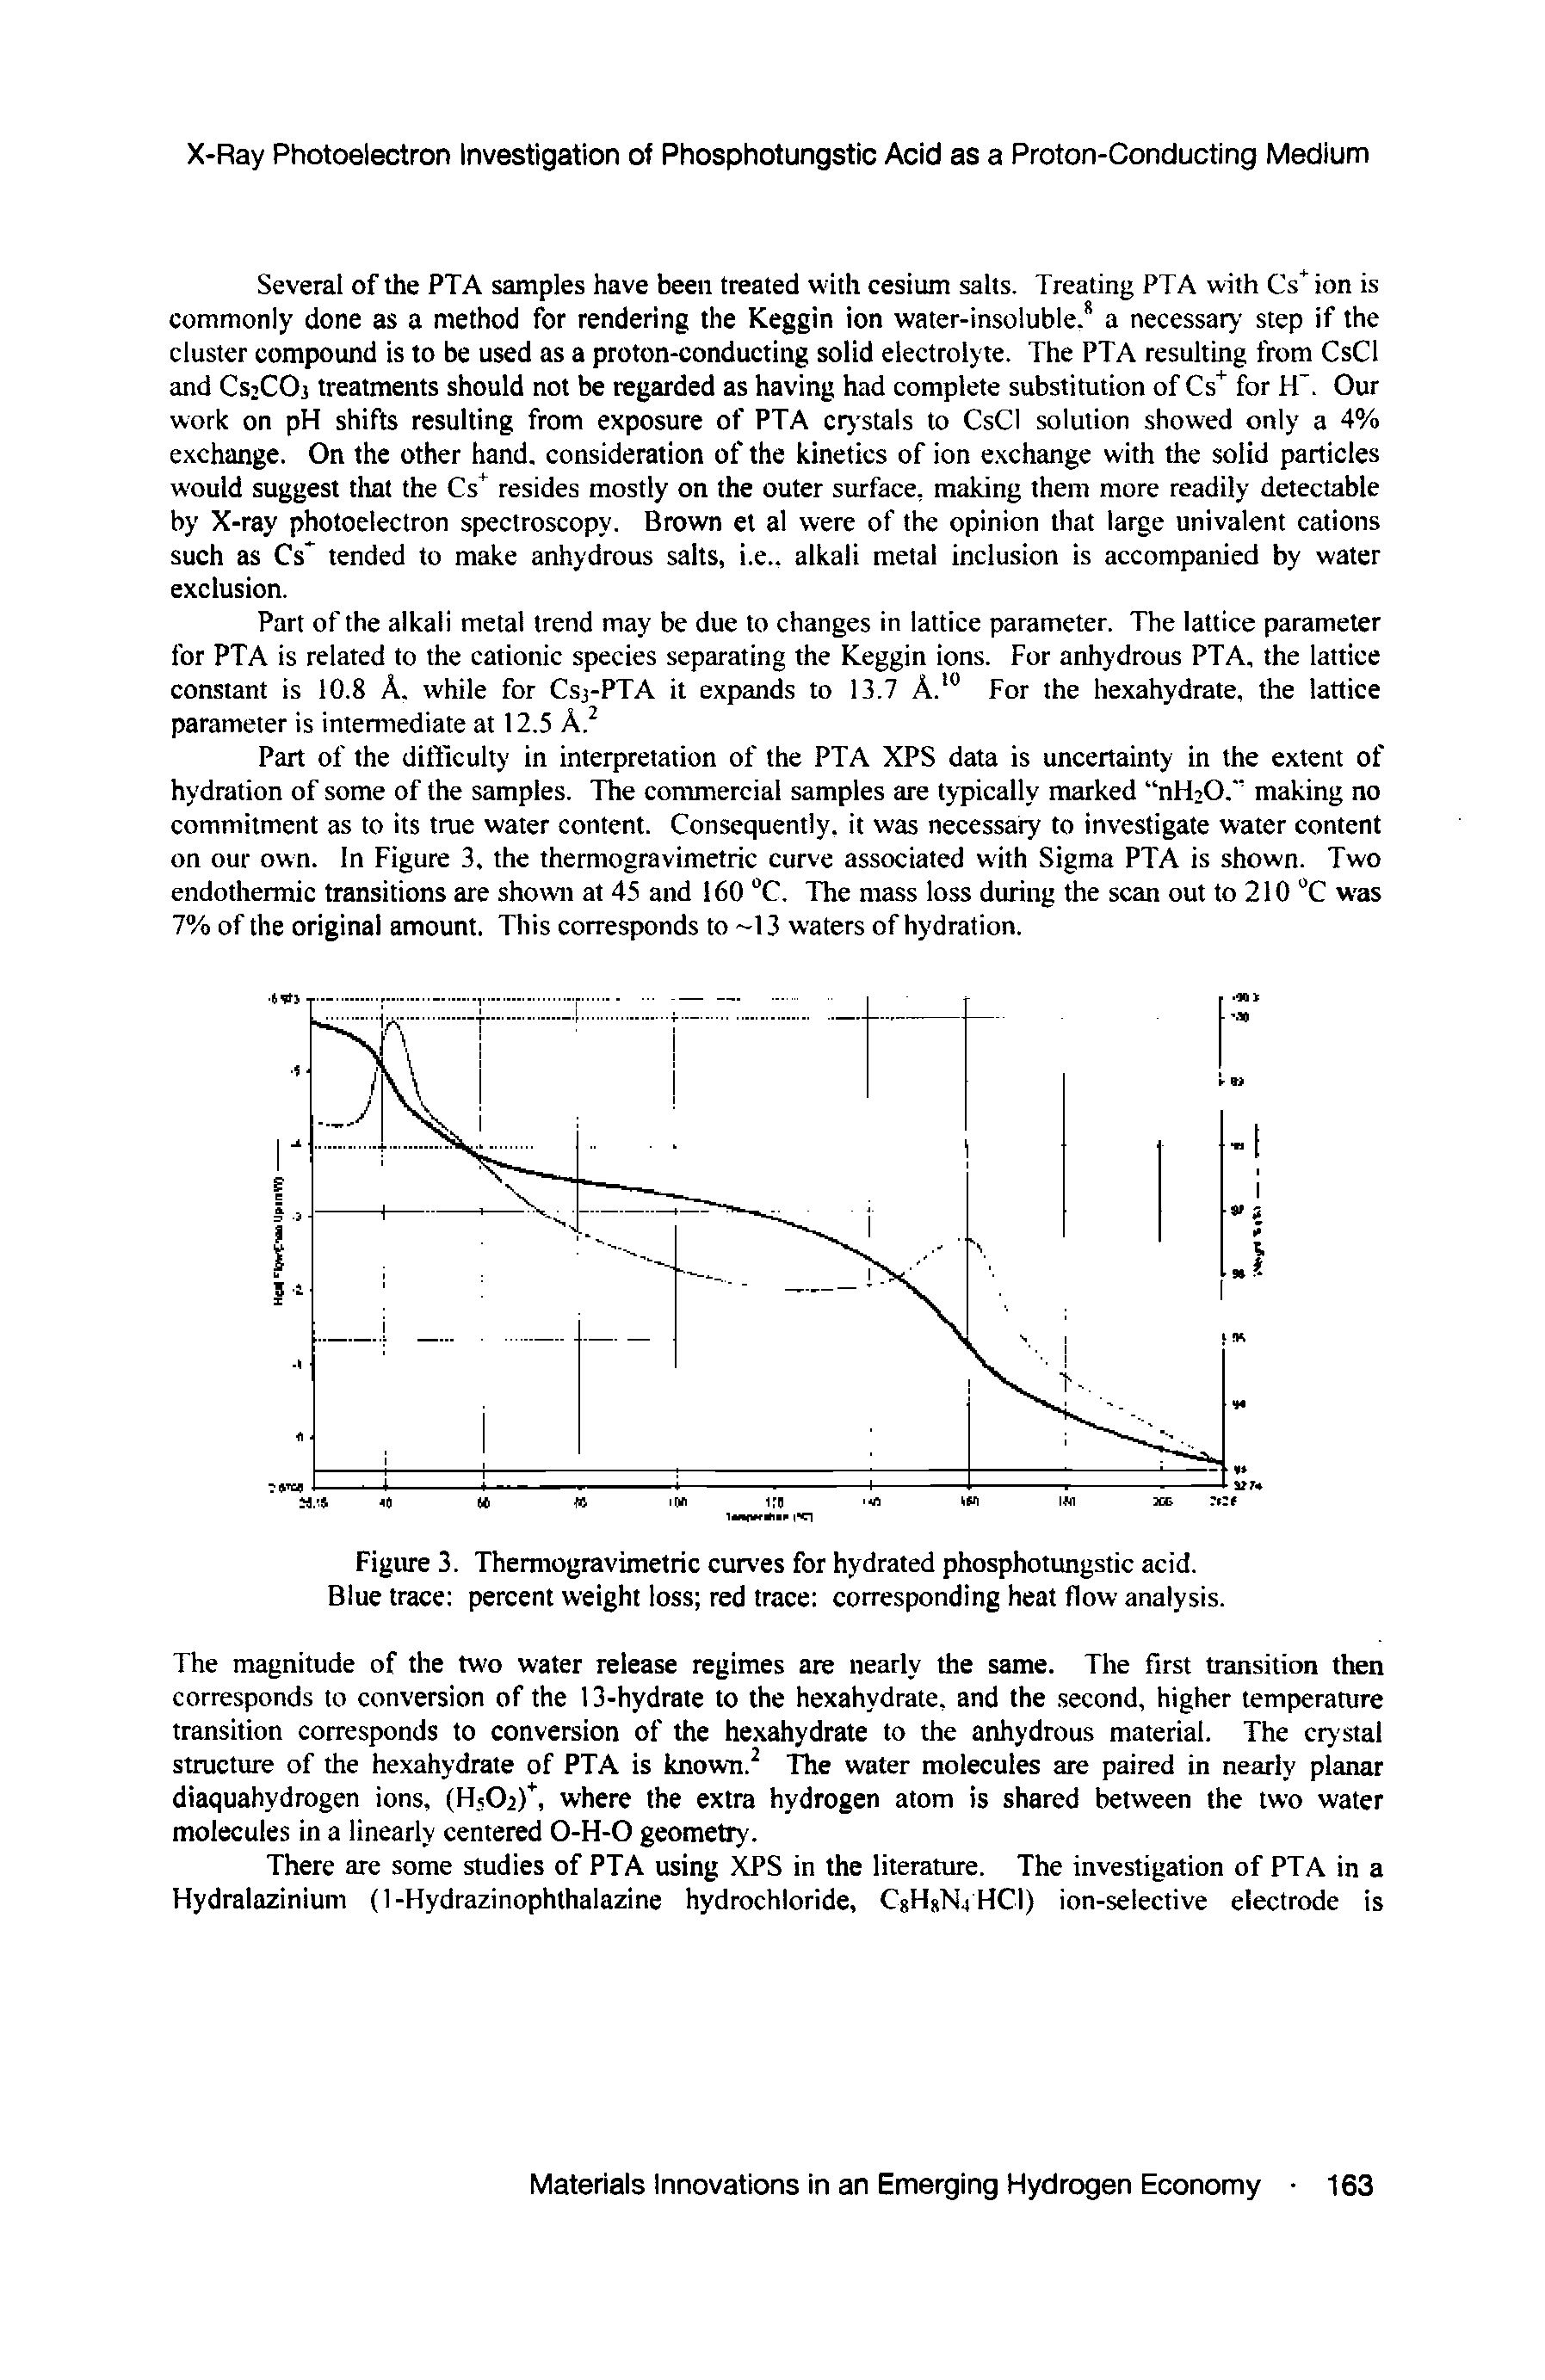 Figure 3. Thermogravimetric curves for hydrated phosphotungstic acid.